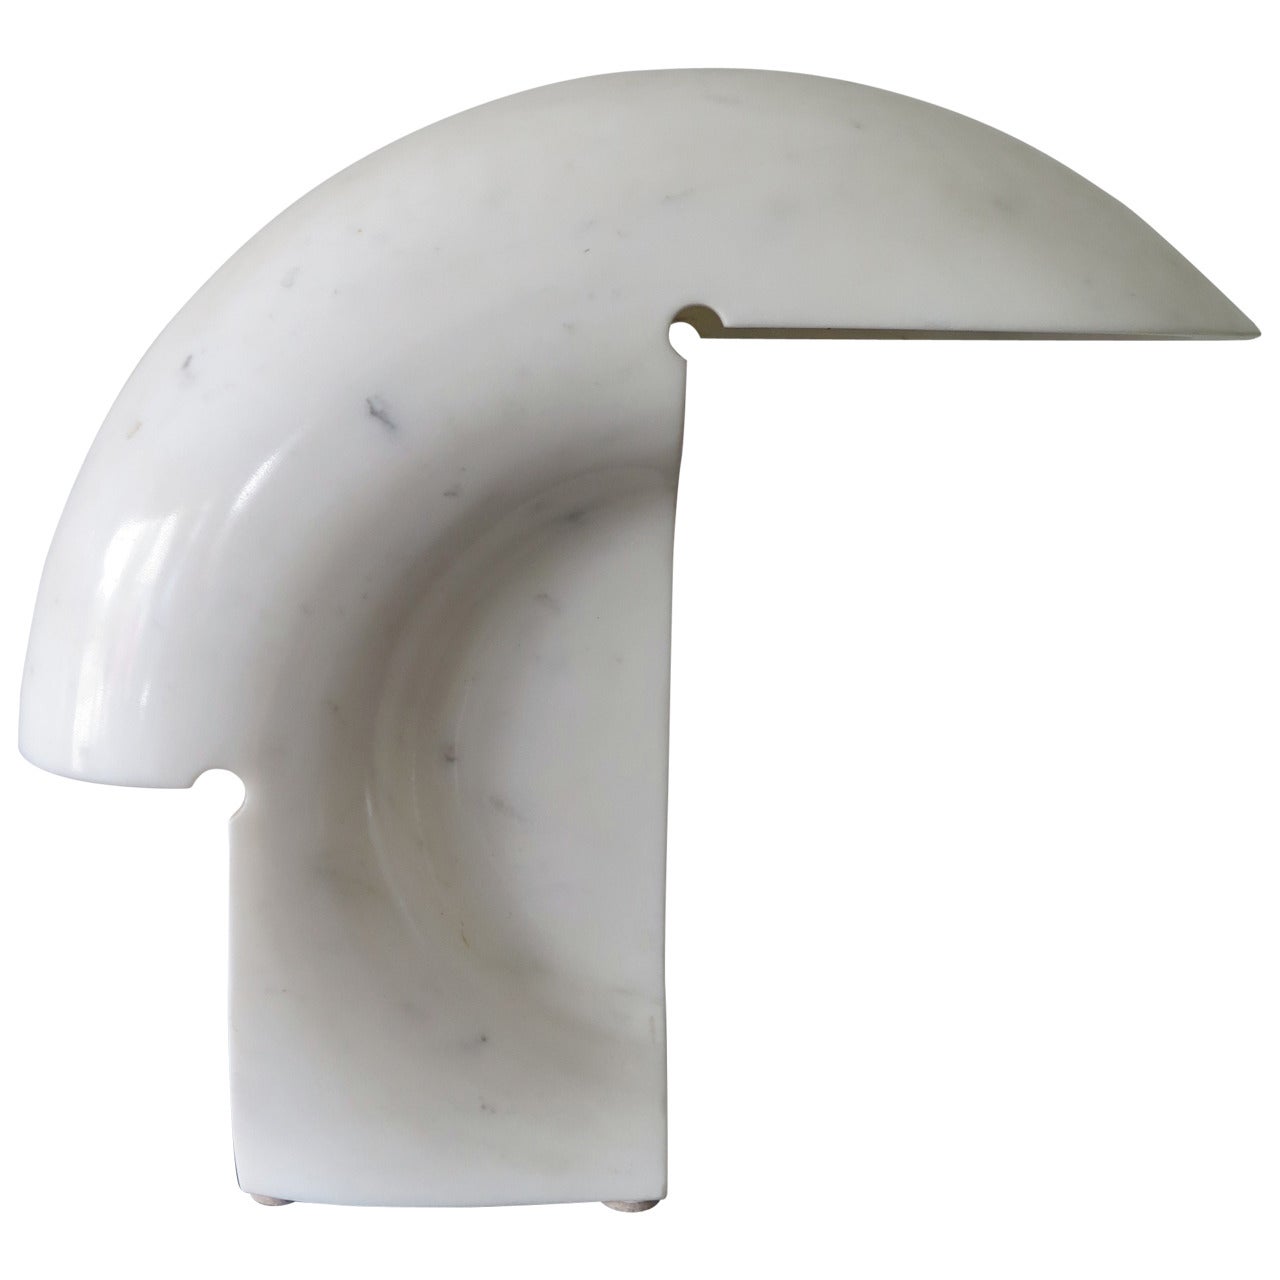 Tobia Scarpa for Flos Biagio Marble Lamp